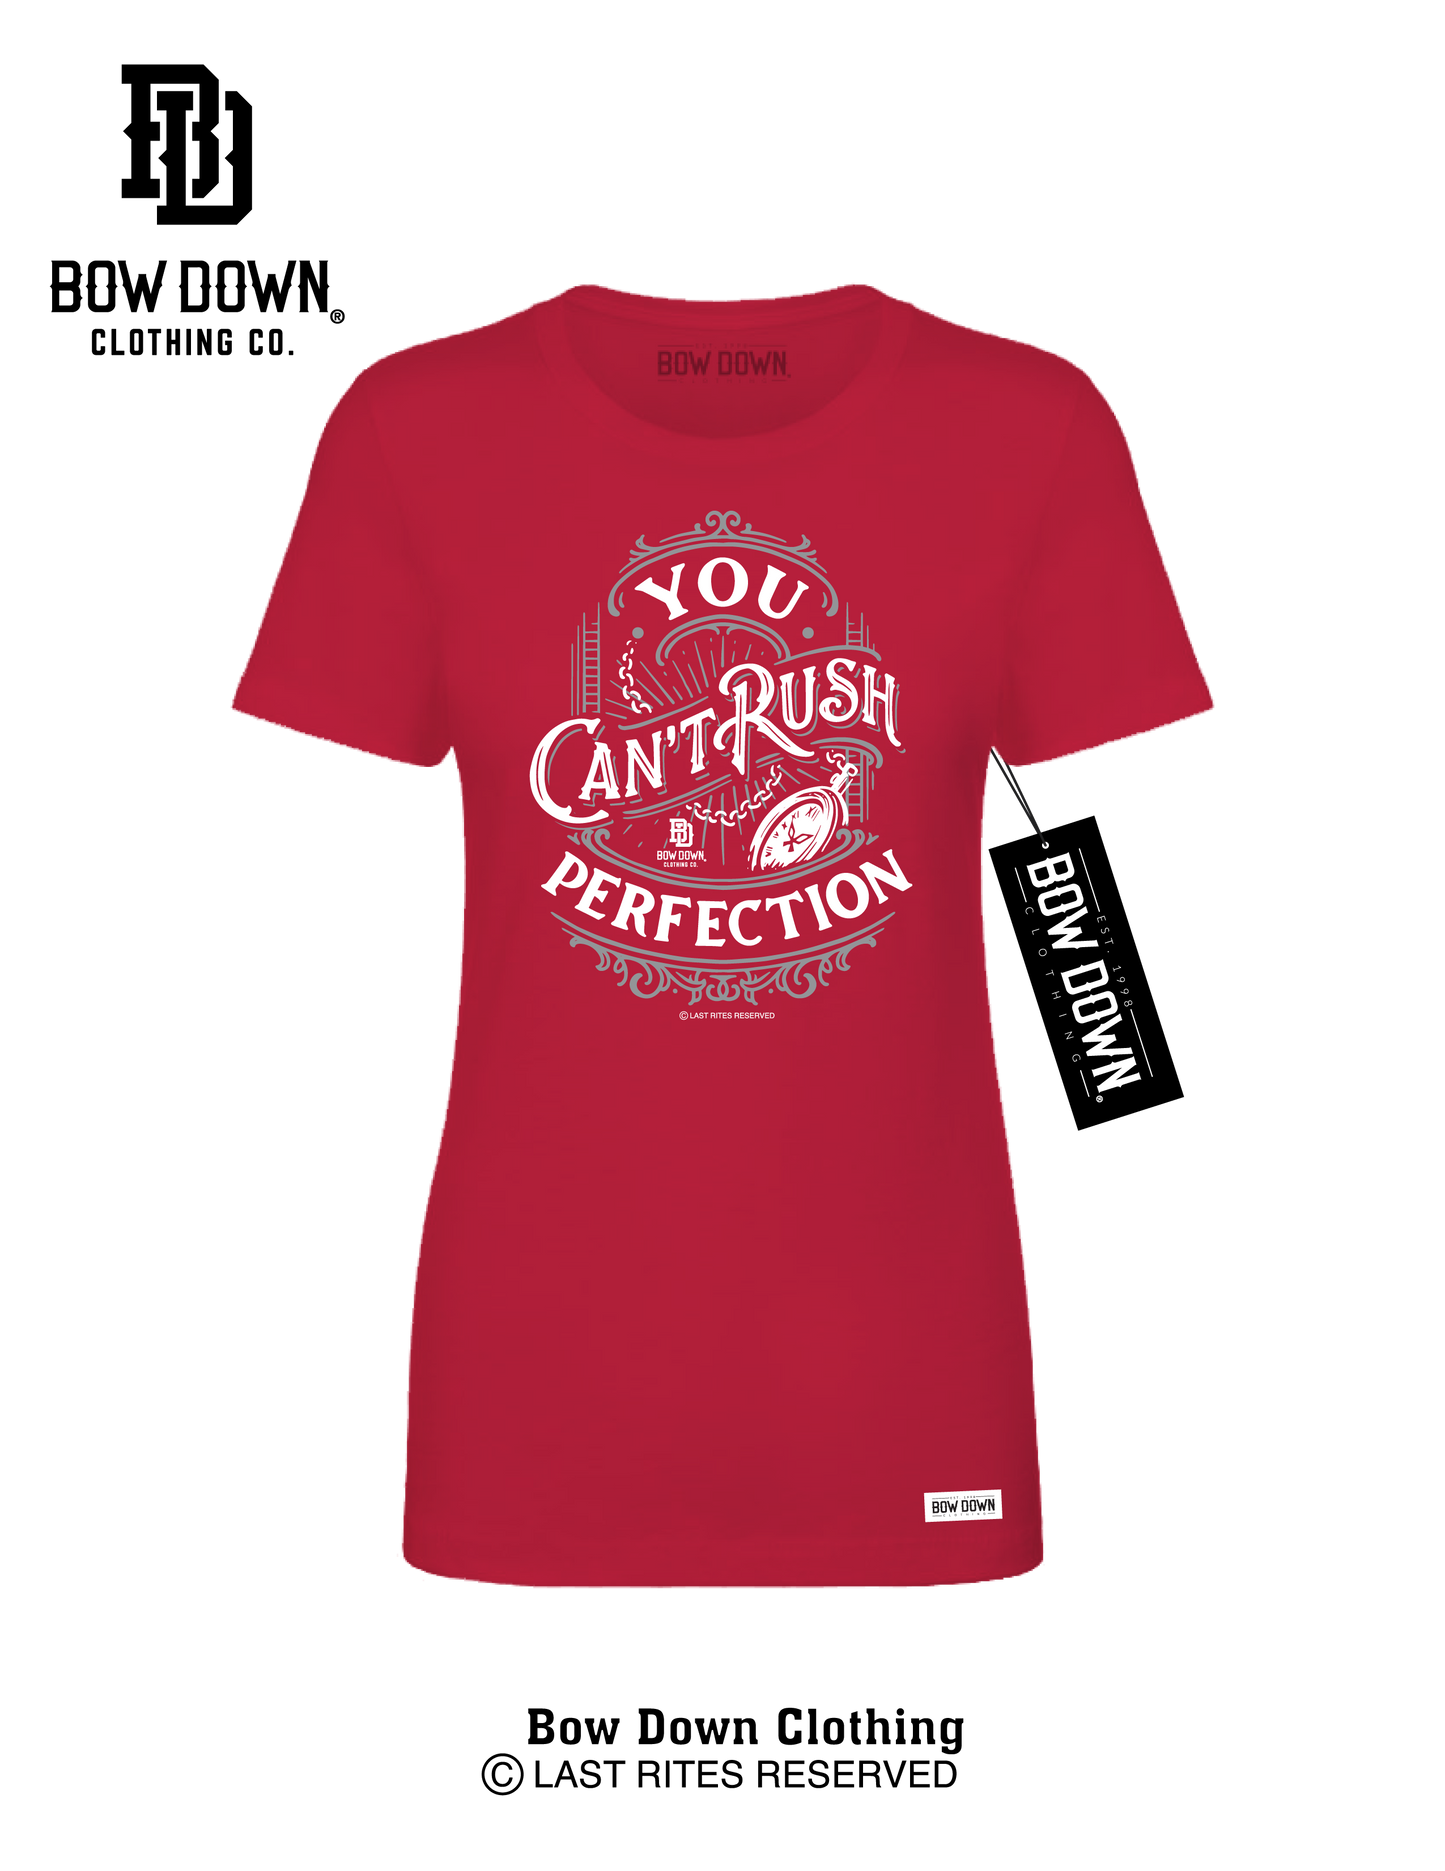 CAN'T RUSH PERFECTION WOMEN'S TEE